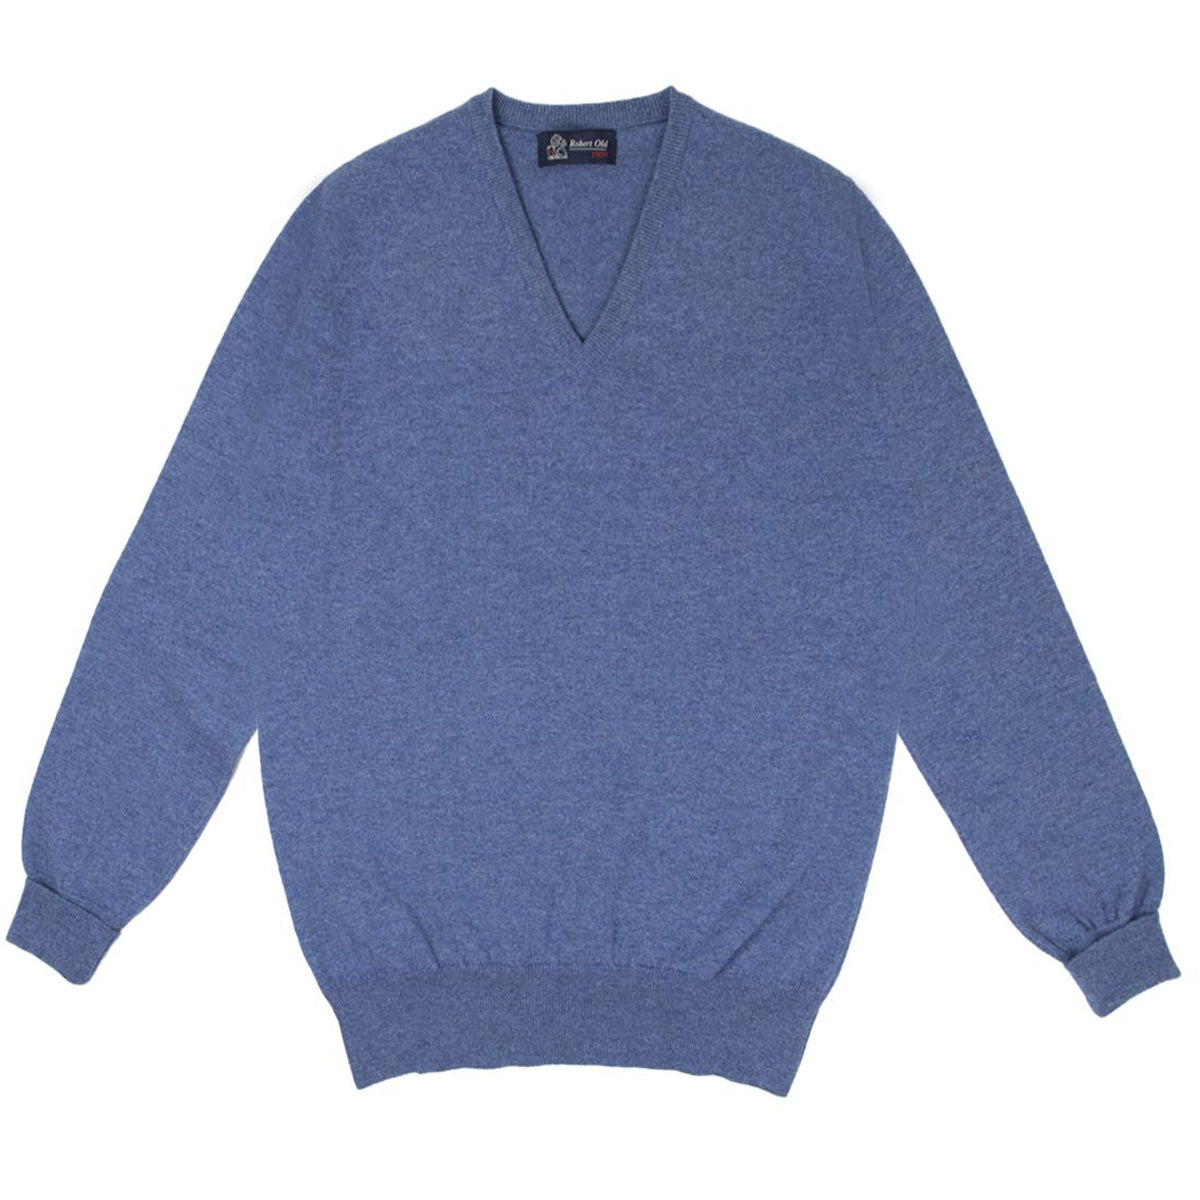 Lapis Blue Chatsworth 2ply V-Neck Cashmere Sweater  Robert Old   